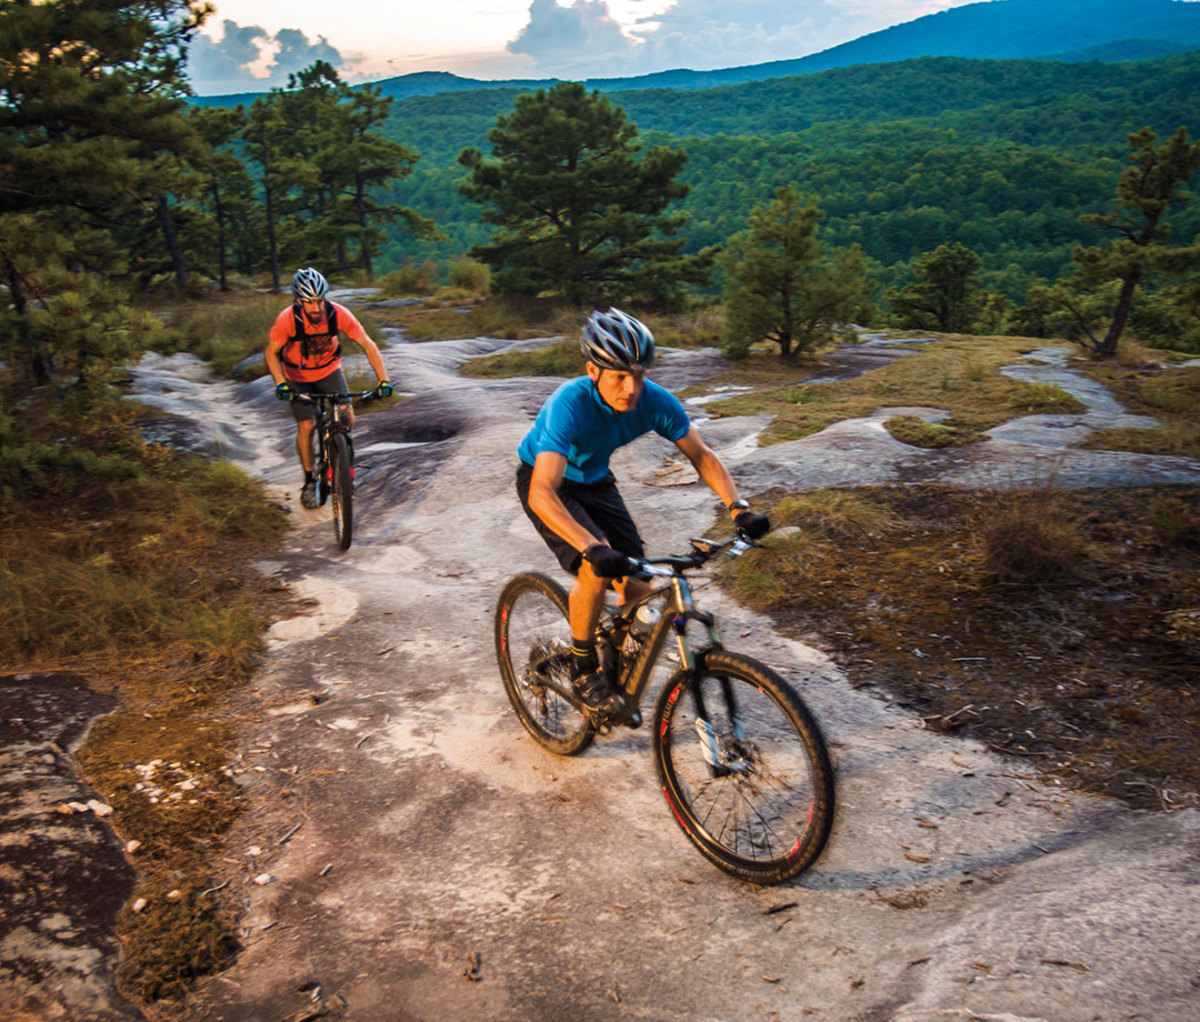 Mountain bikers going over smooth rock